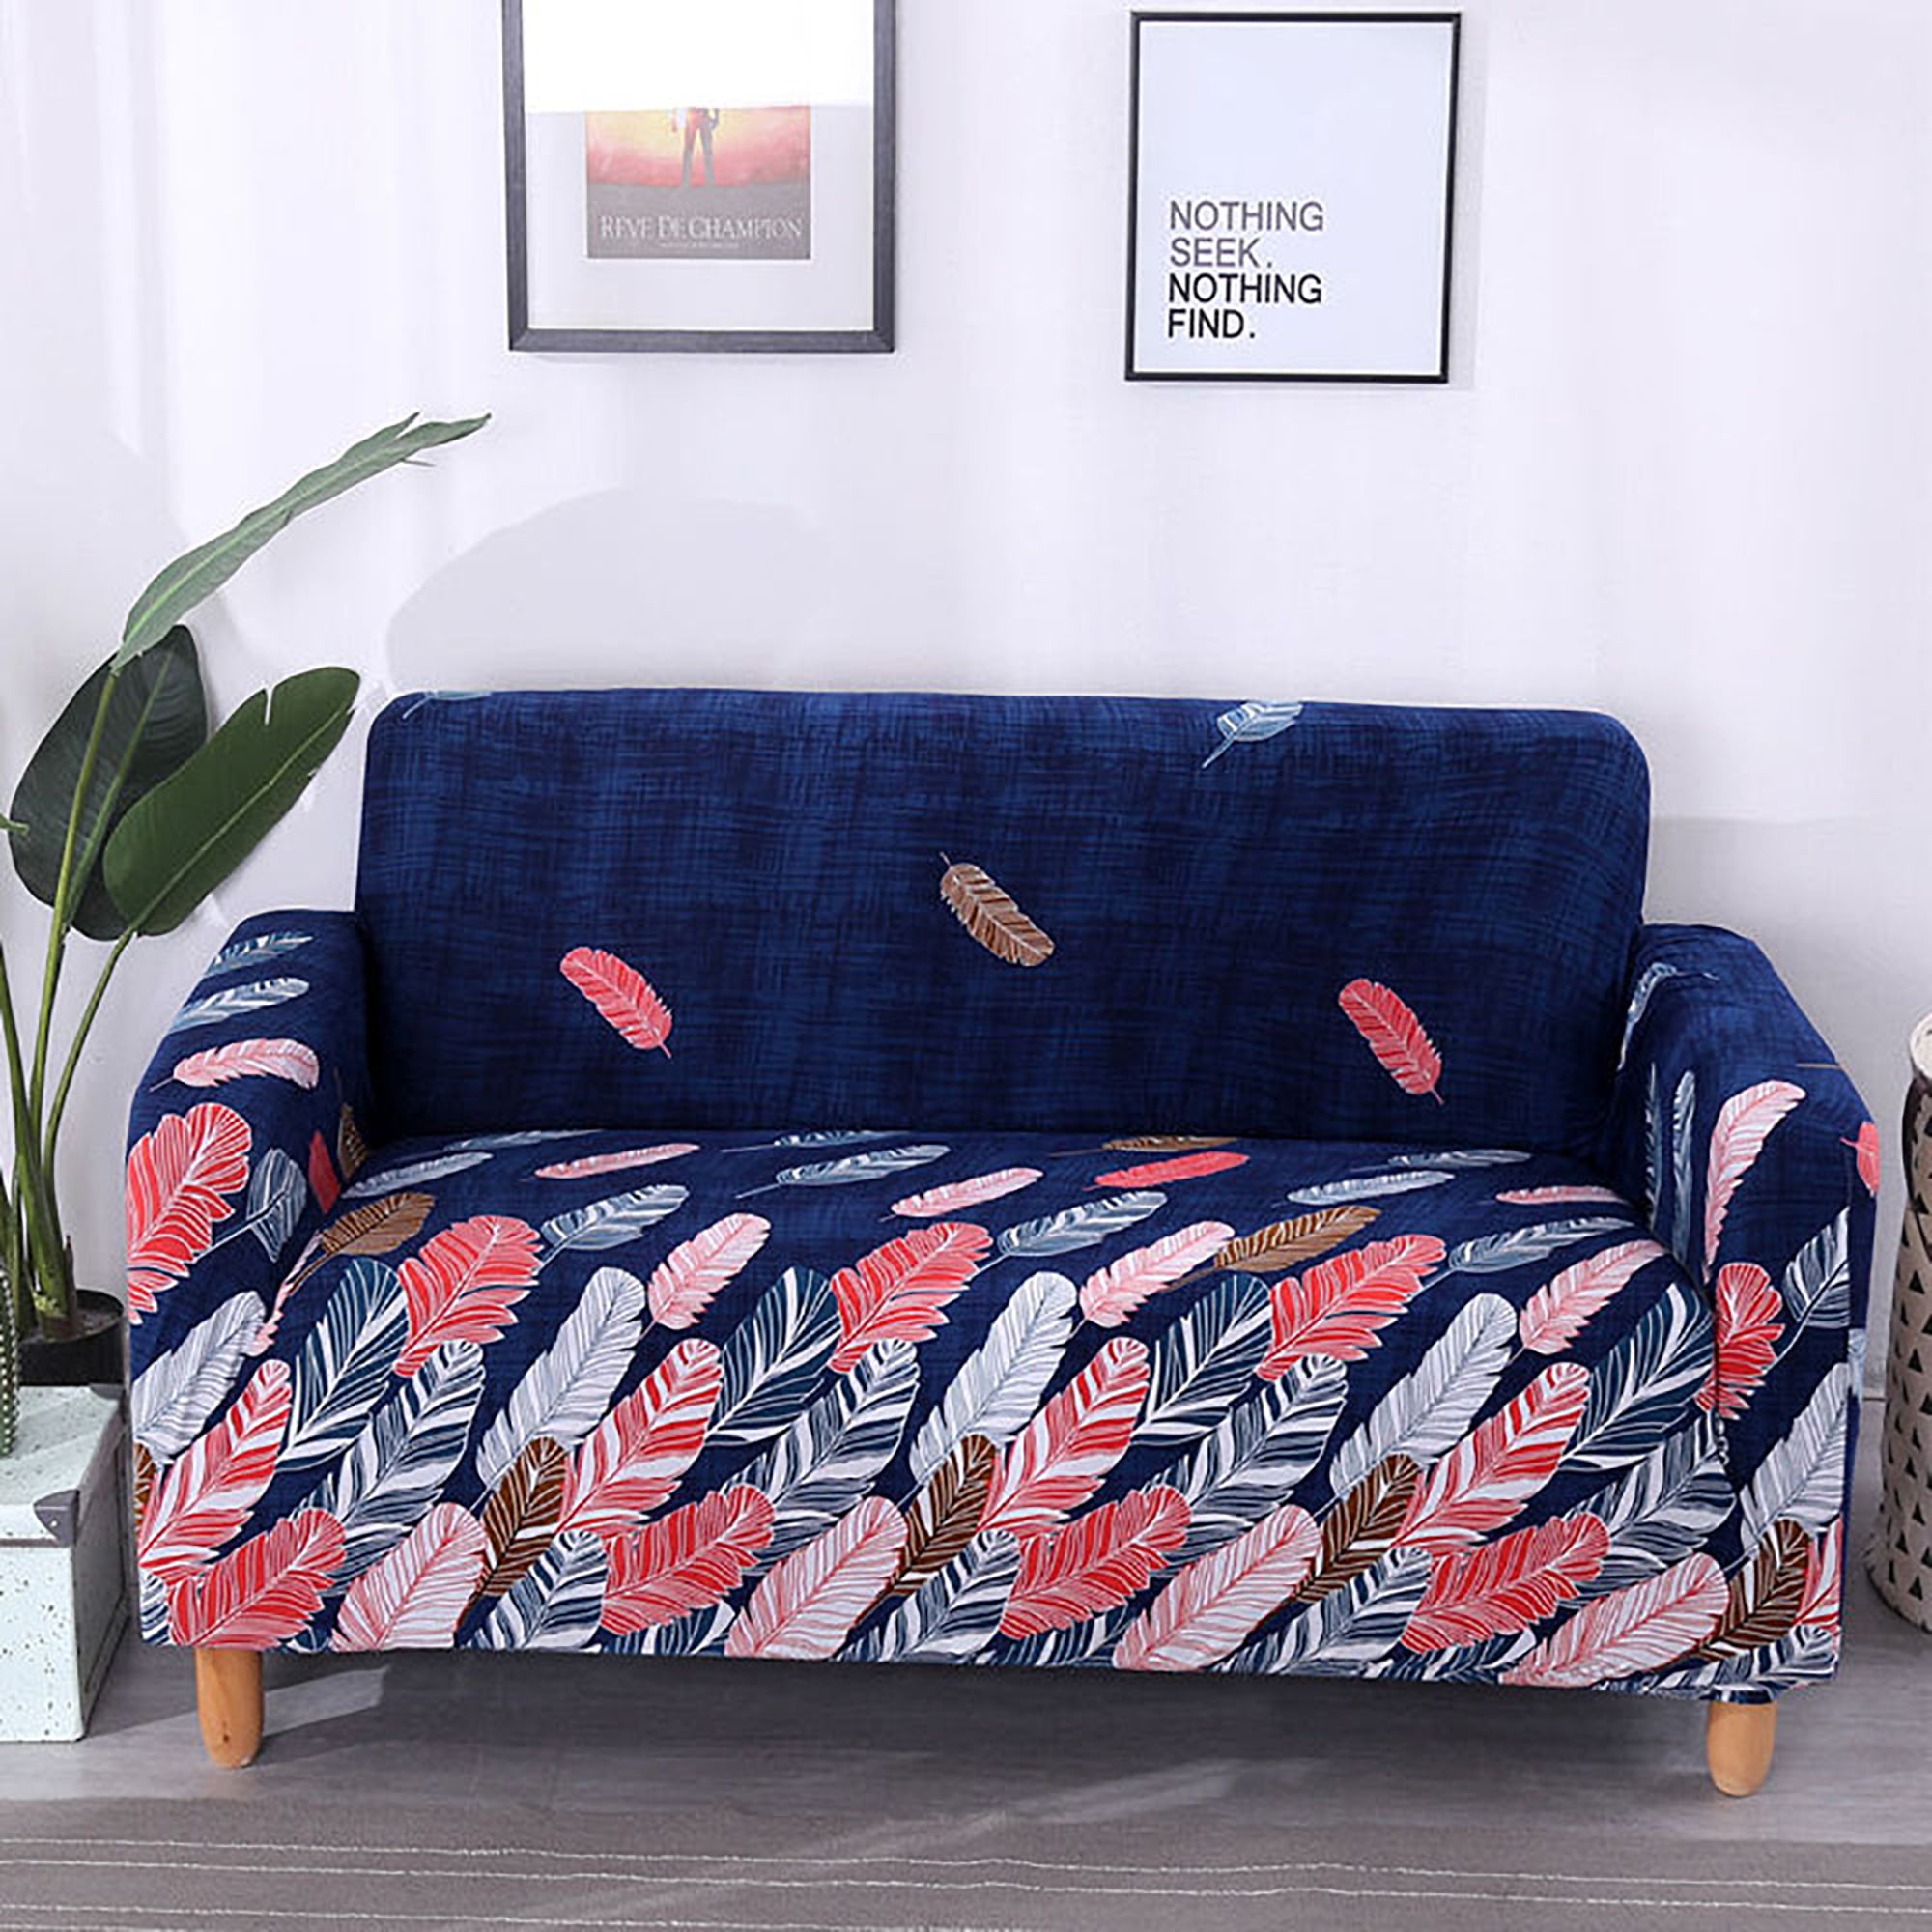 Details about   1/2/3/4 Seater Painting Sofa Cover Slipcover Sofa Towel Fabric Washable Elastic 